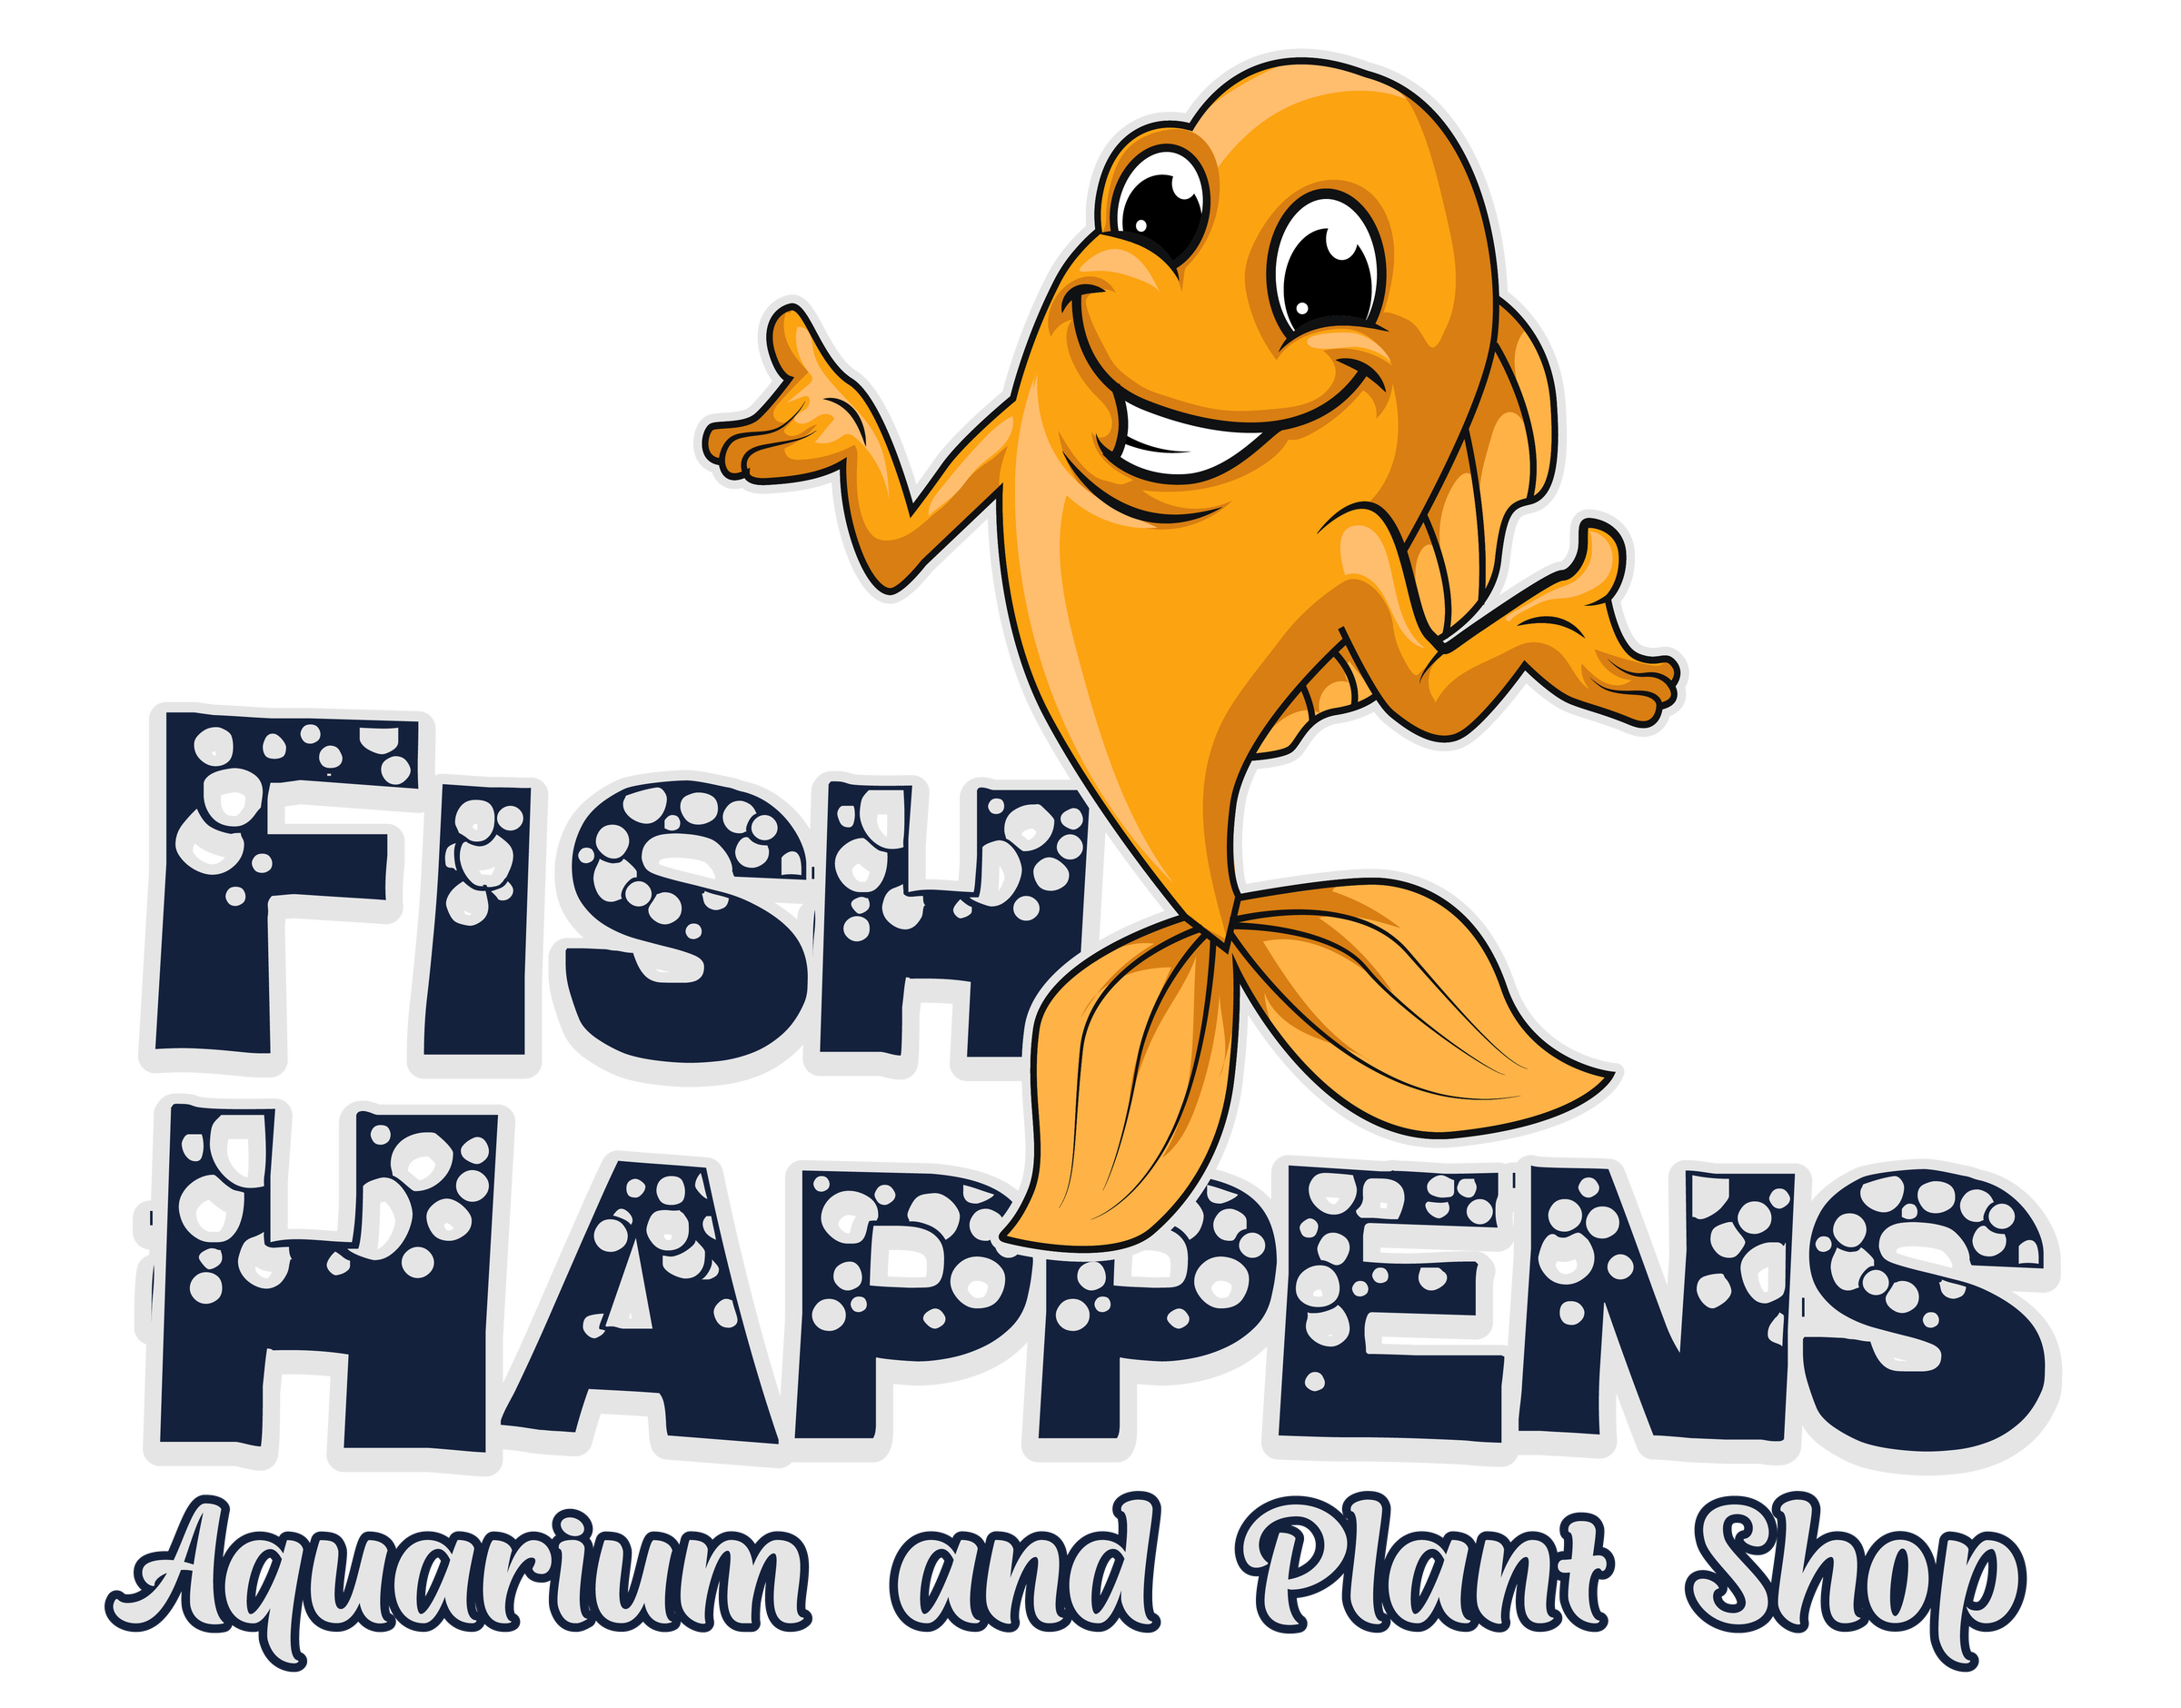 Indianapolis Freshwater Fish & Plants: Your Aquatic Source